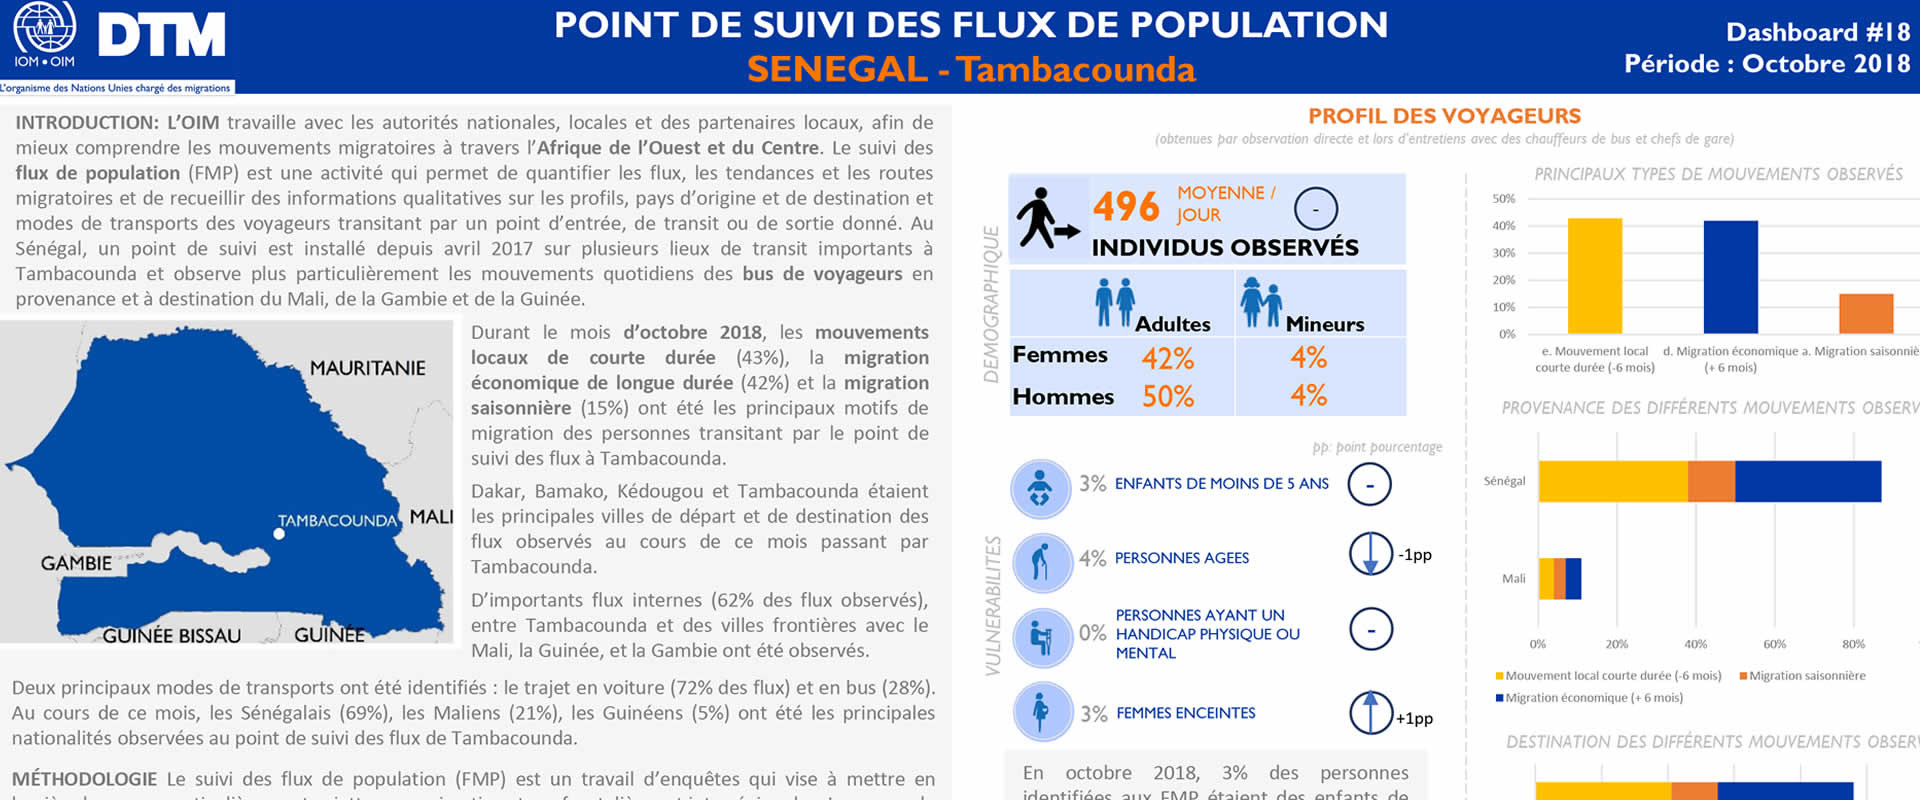 Senegal - Dashboard Tracking Points of Population Flows 18 (October 2018) [French]